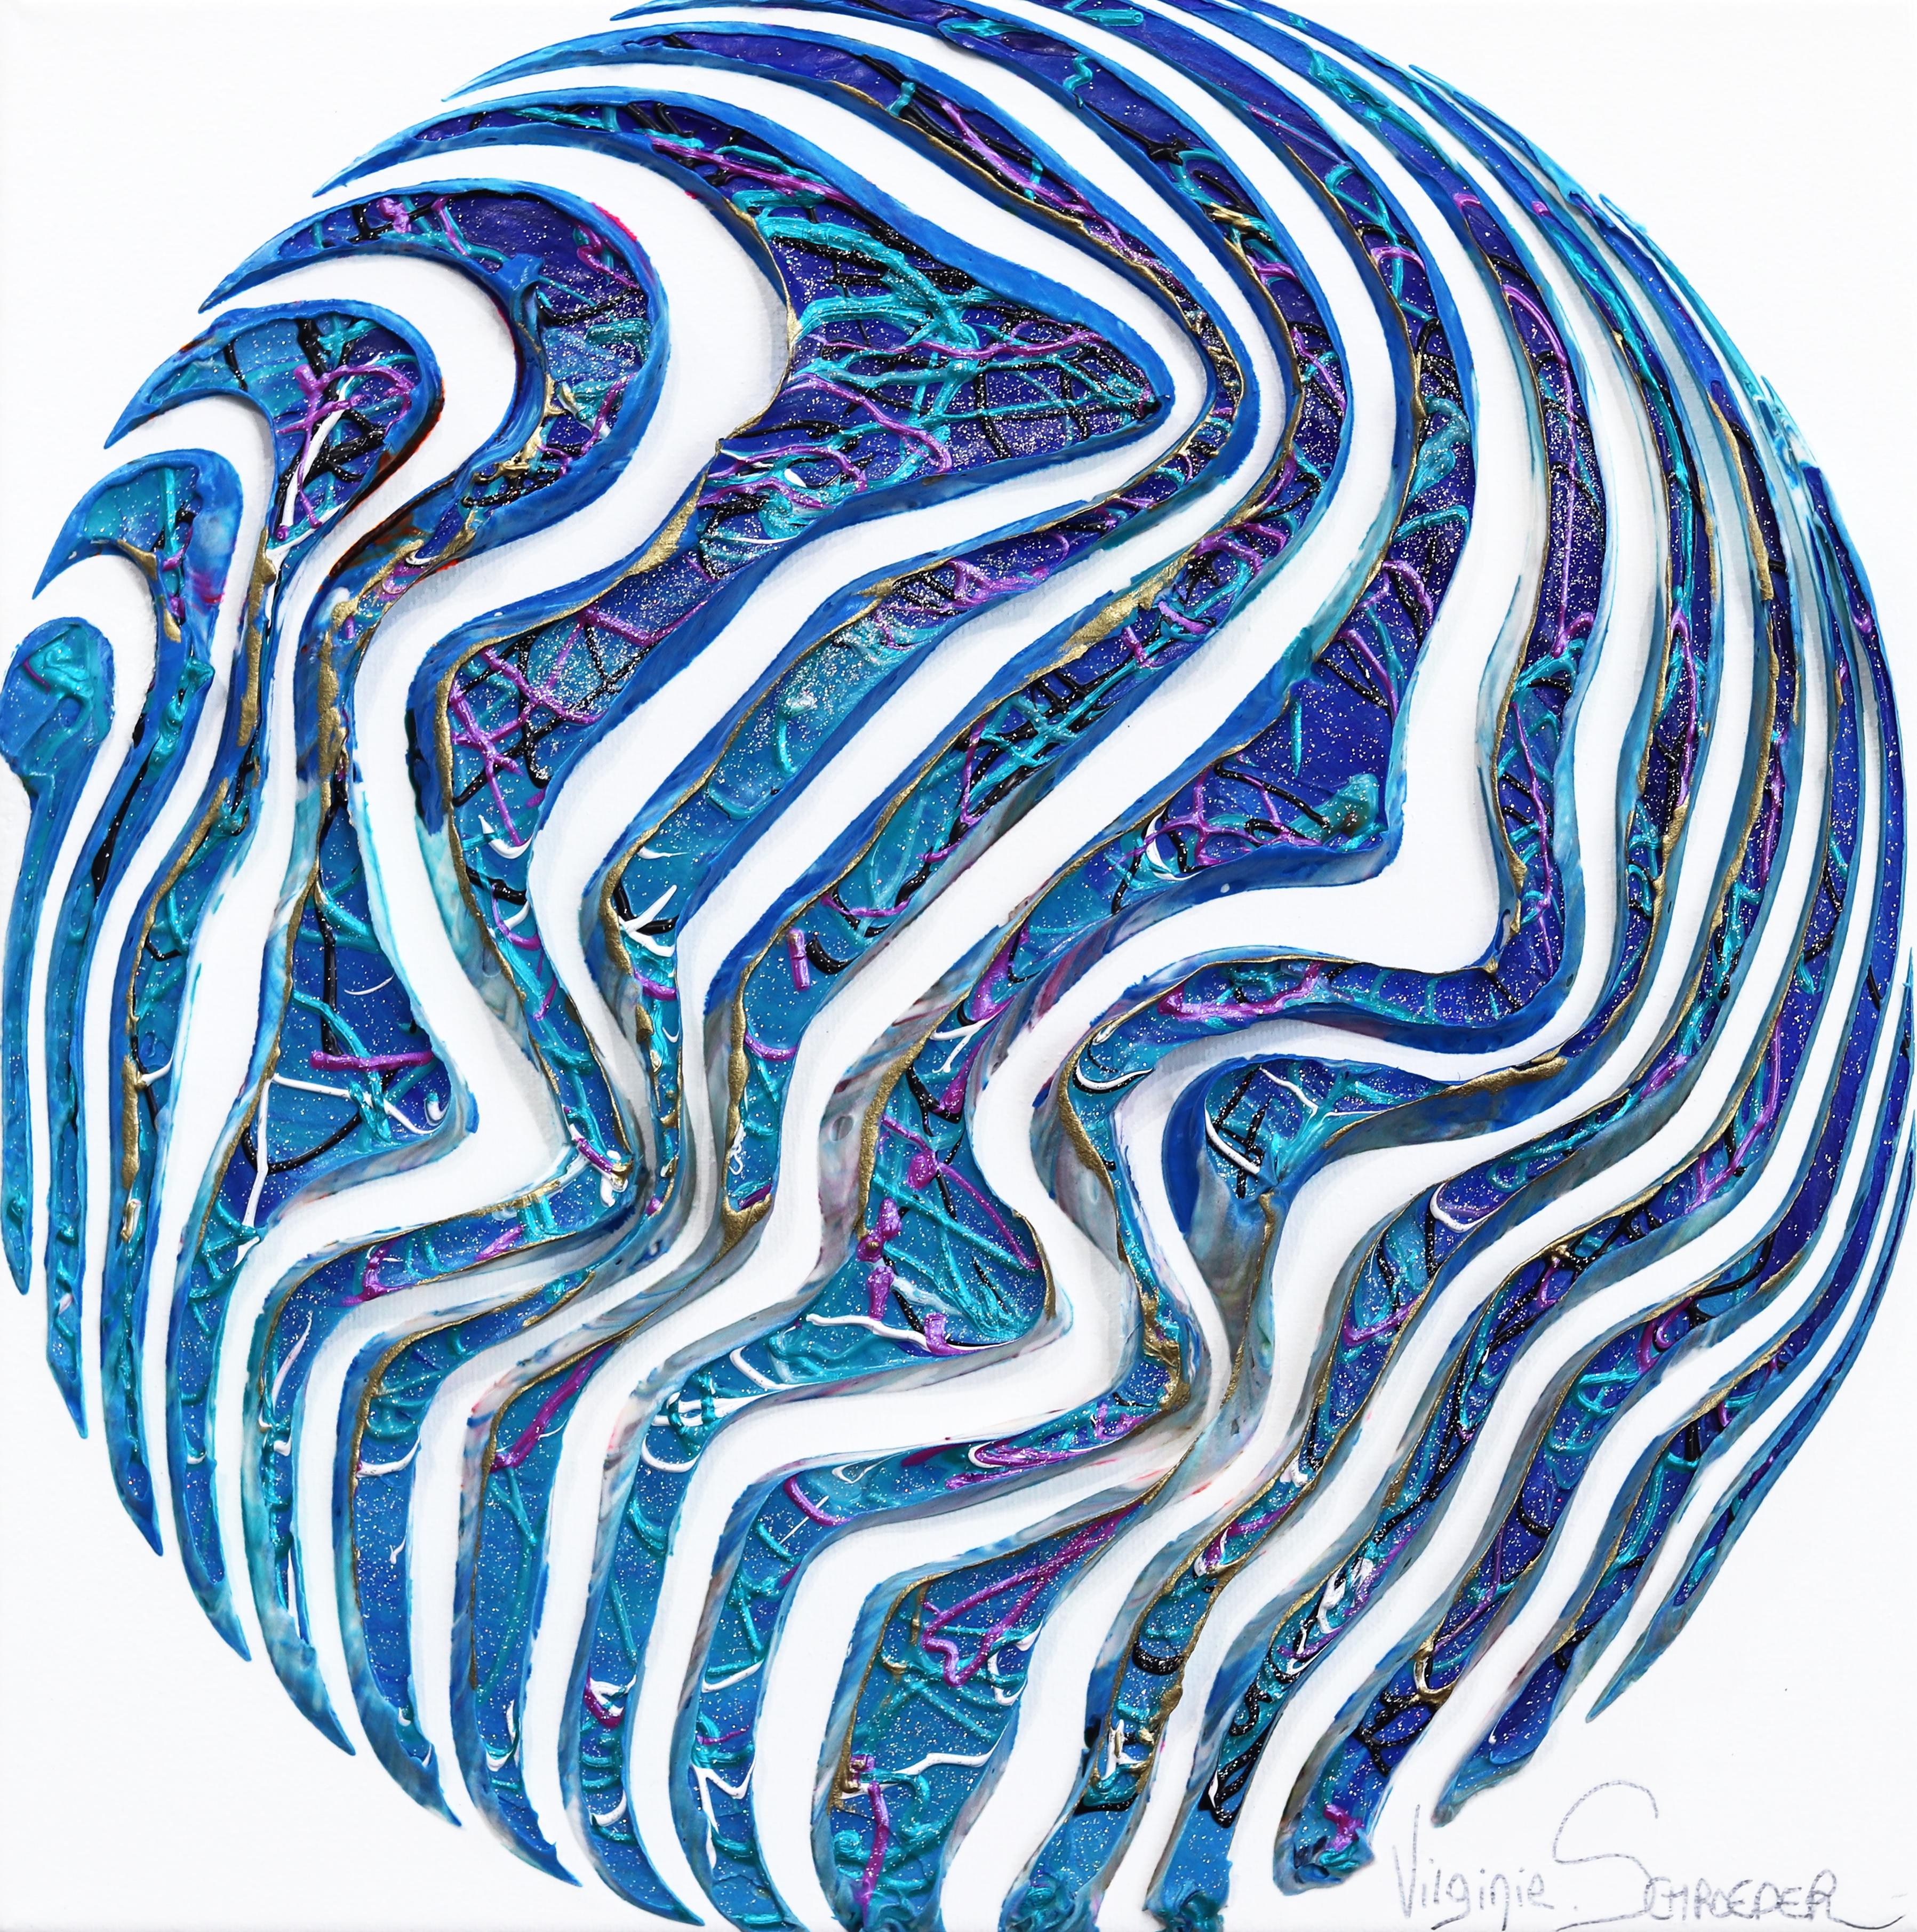 The Waves and the Life - Minimalist Abstract 3D Textural Blue Circle Painting - Art by Virginie Schroeder